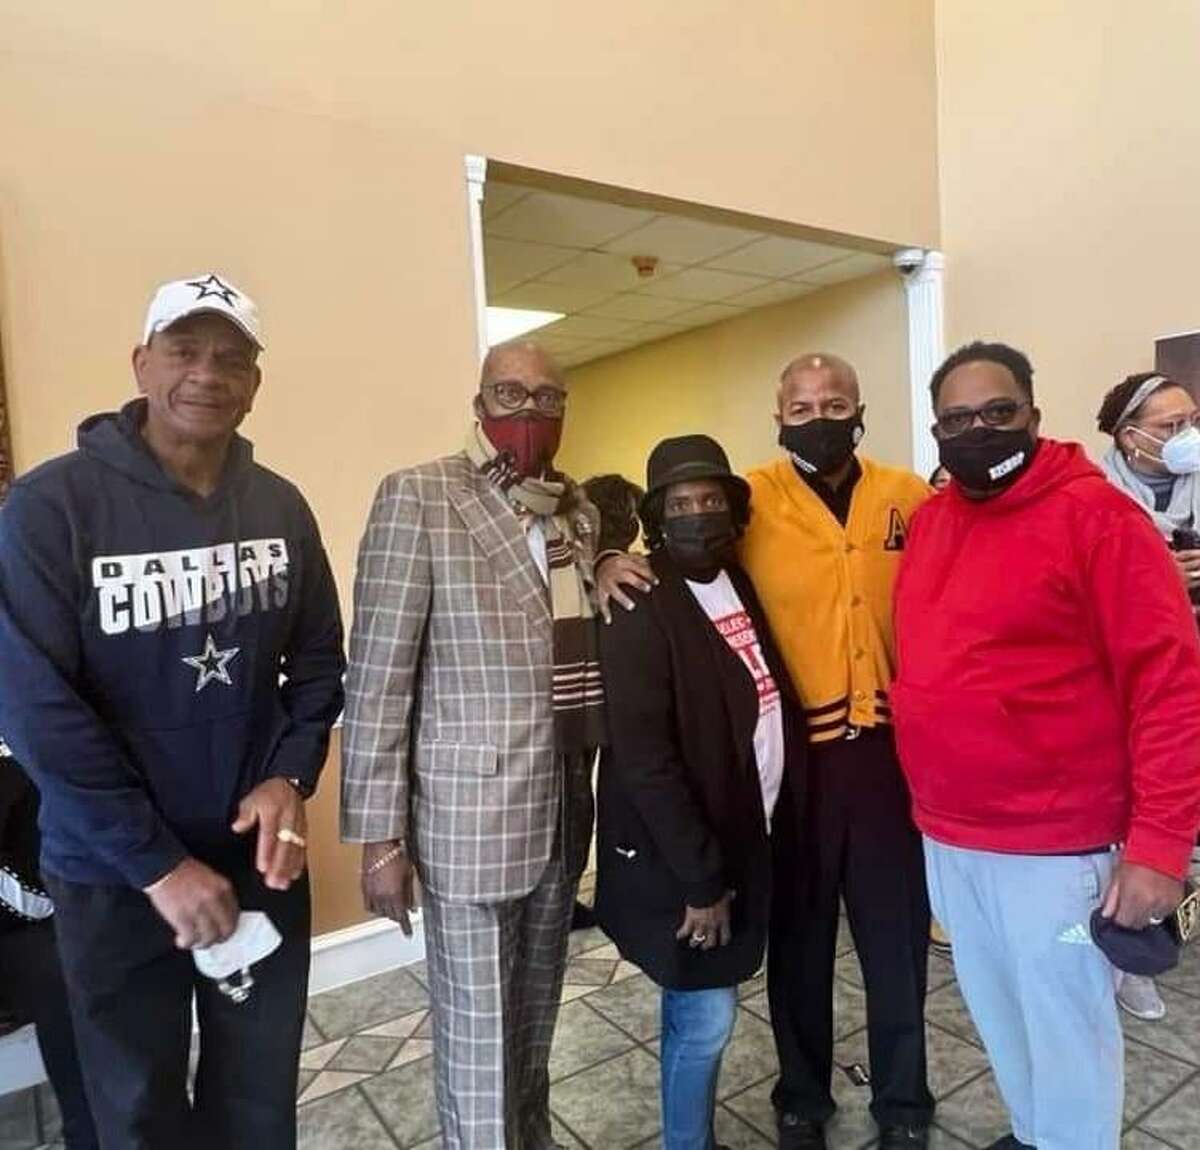 Missouri City residents and elected officials met at the Christ Temple of Deliverance Church on Saturday to participate in a community outreach event in honor of Martin Luther King Jr. Day.